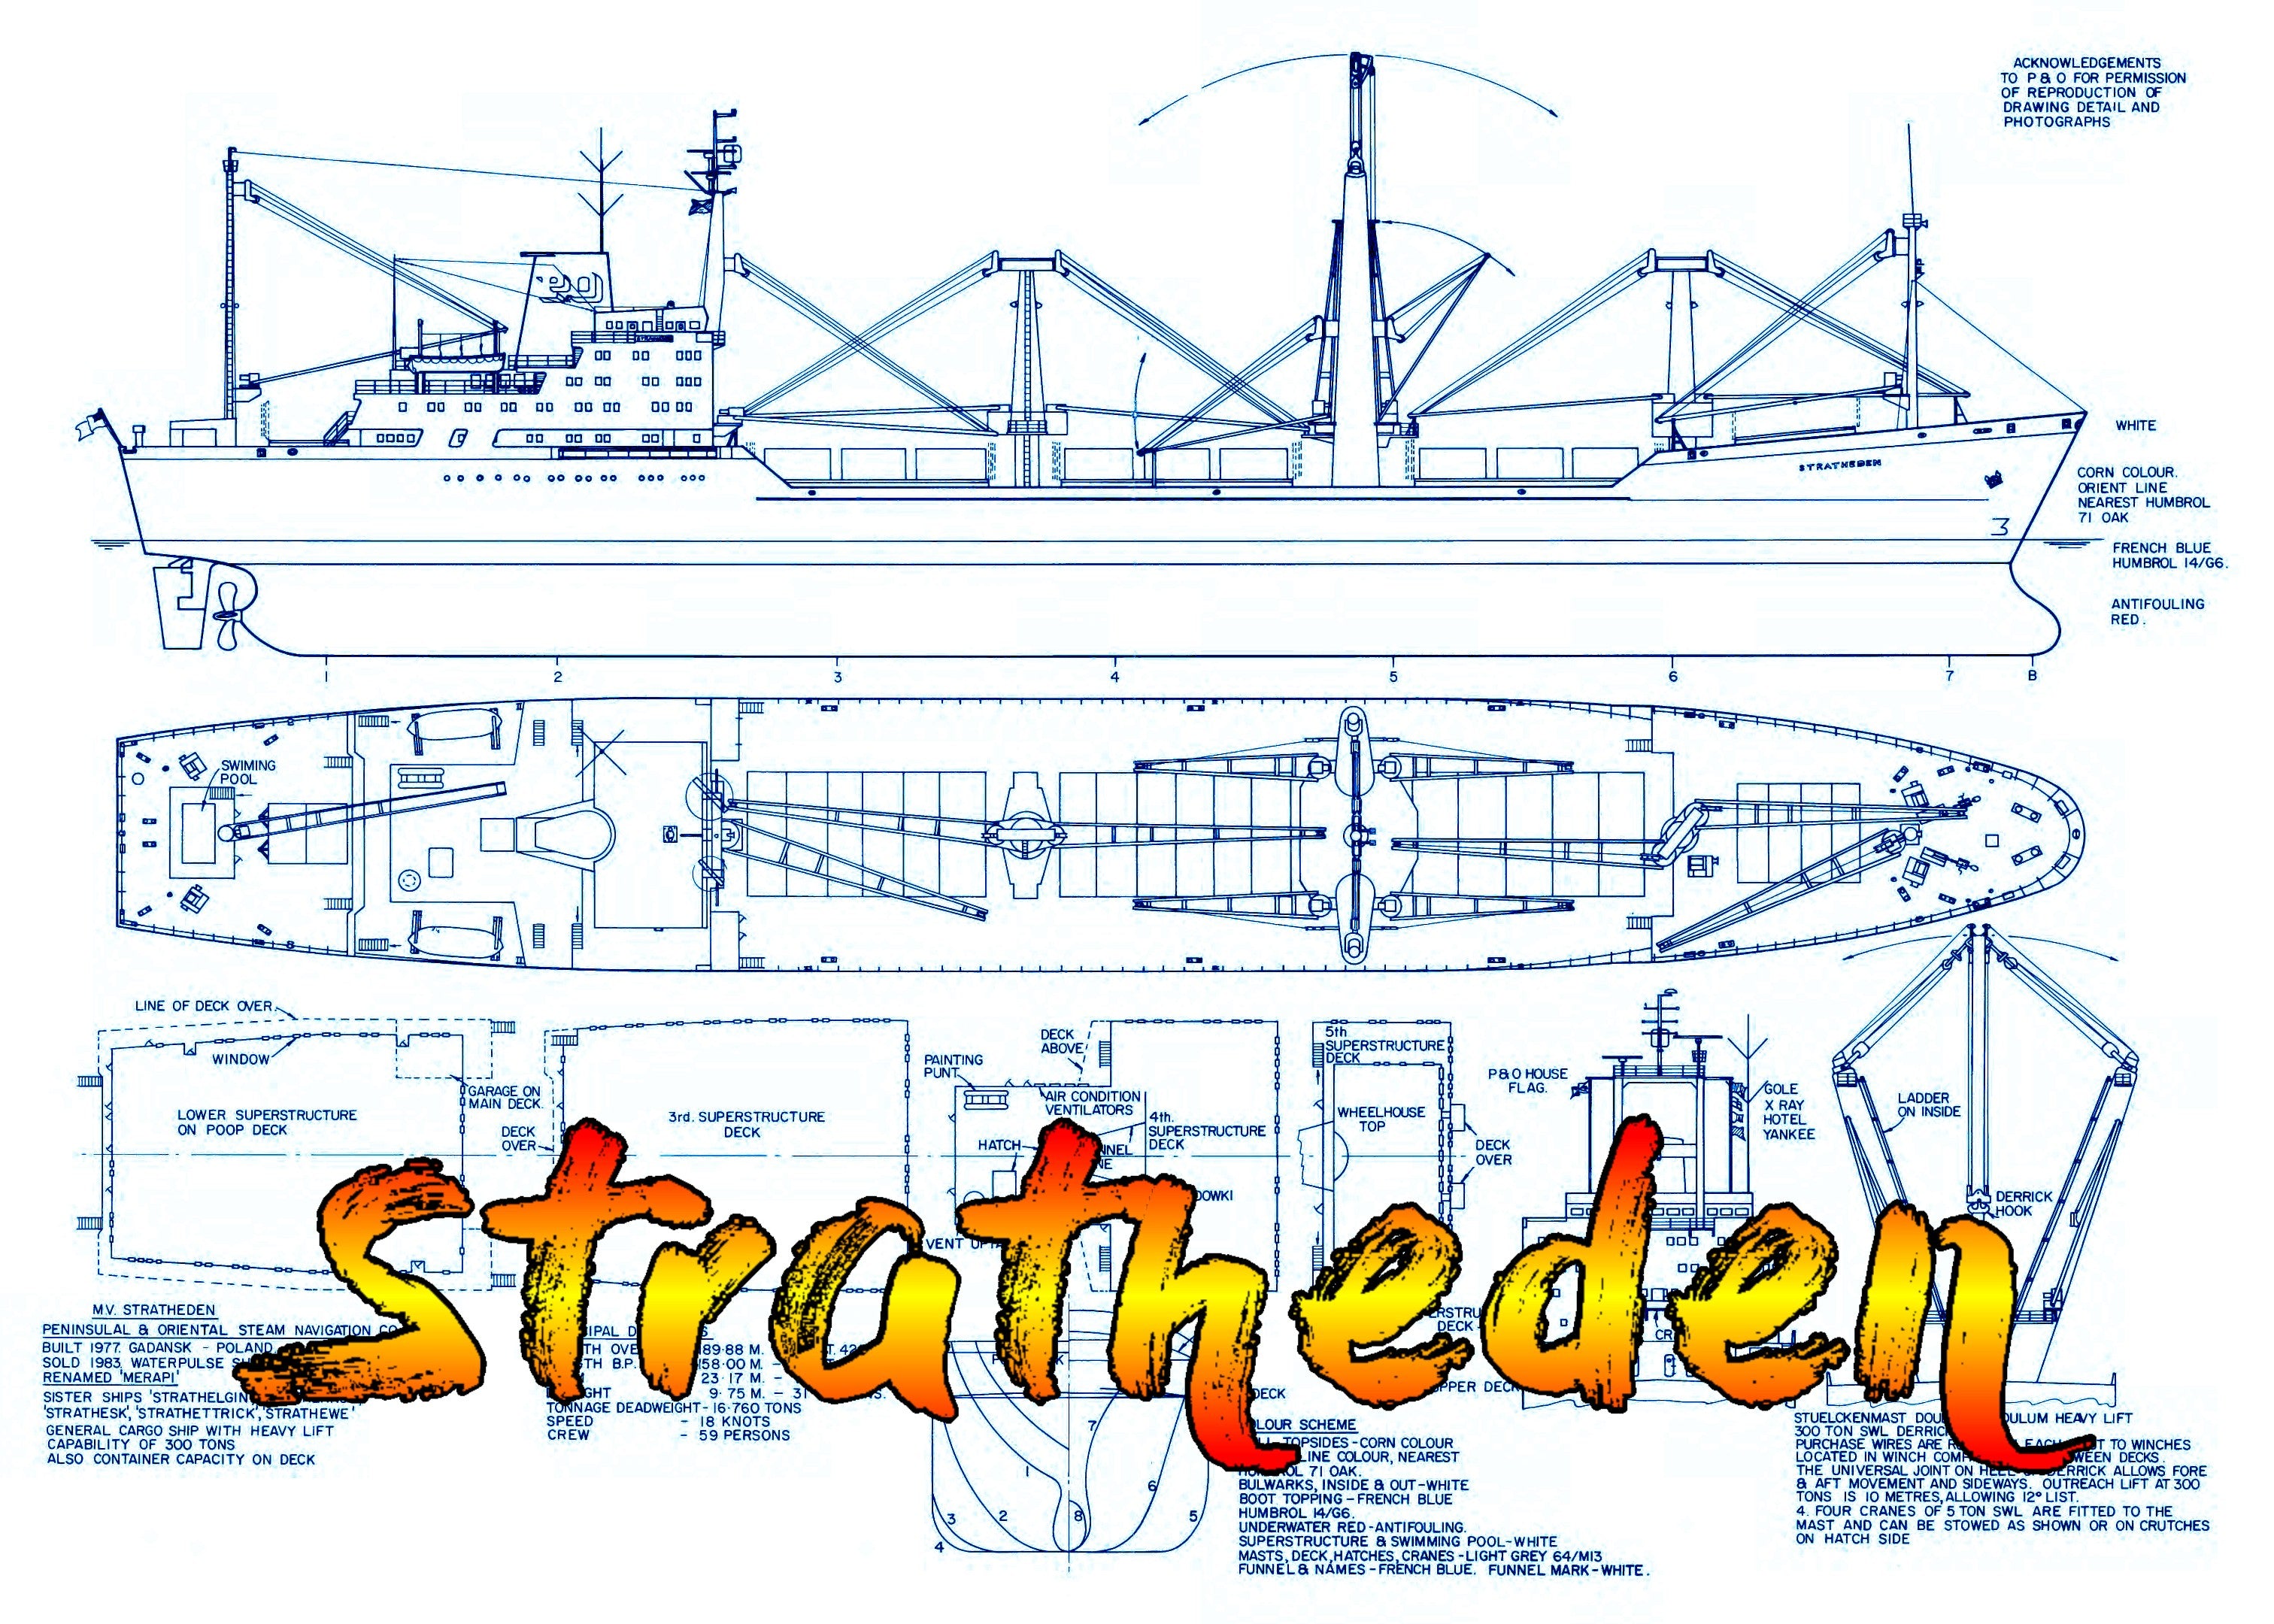 full size printed scale drawing scale 1:192 cargo ship with heavy lifting "stratheden" suitable for radio control